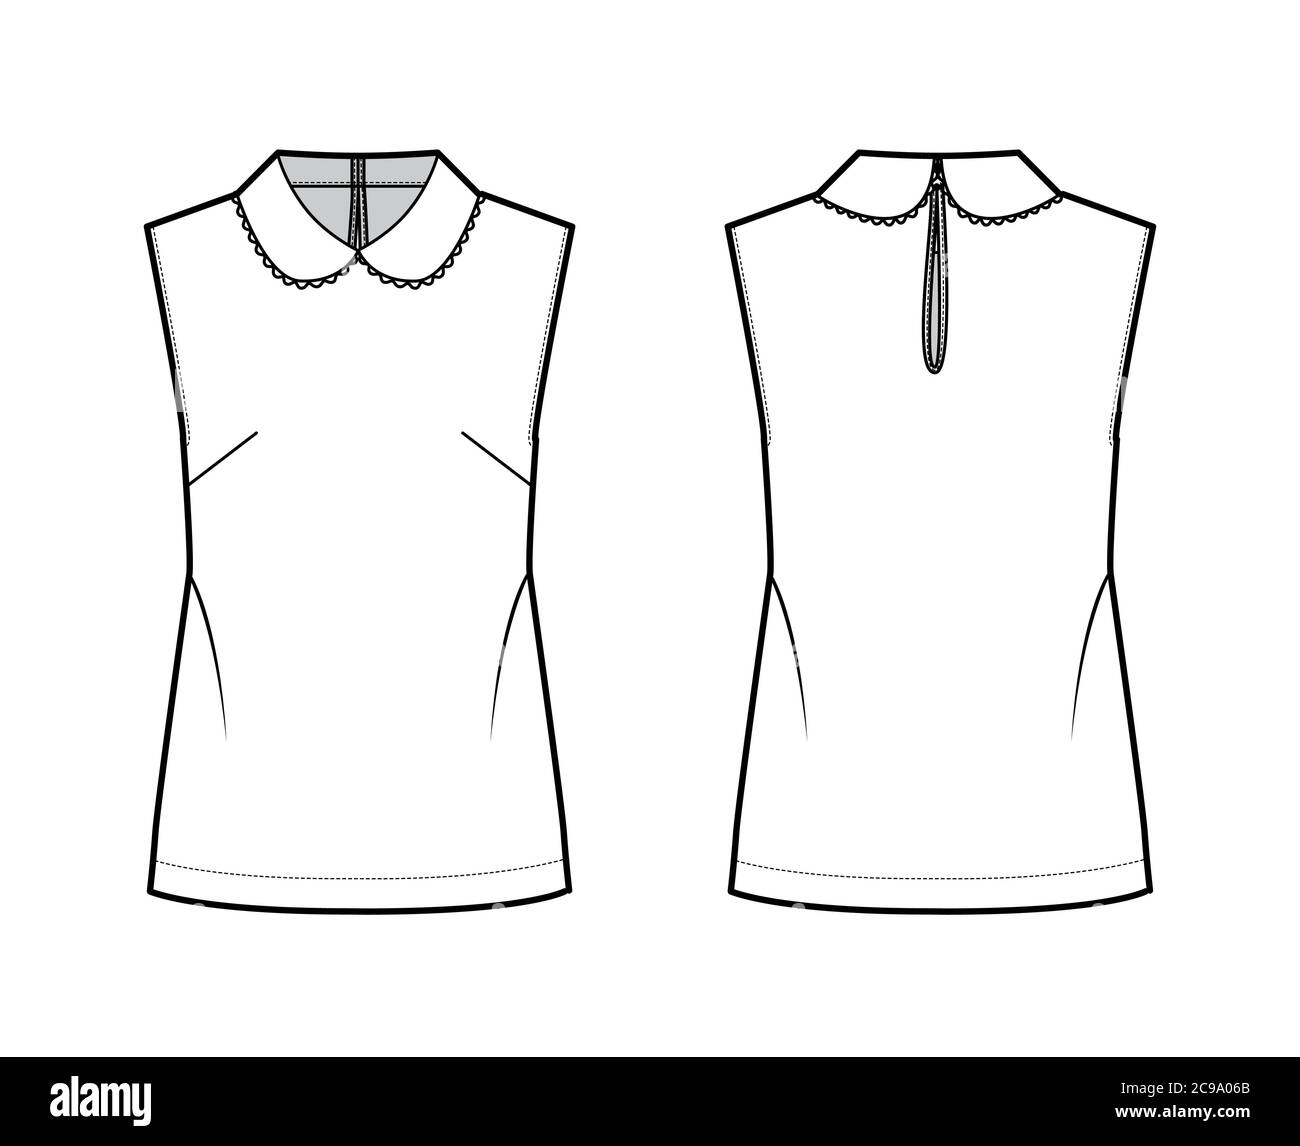 Blouse technical fashion illustration with loose silhouette, sleeveless, round collar trimmed with scalloped lace. Flat shirt apparel template front back white color. Women, men unisex top CAD mockup Stock Vector